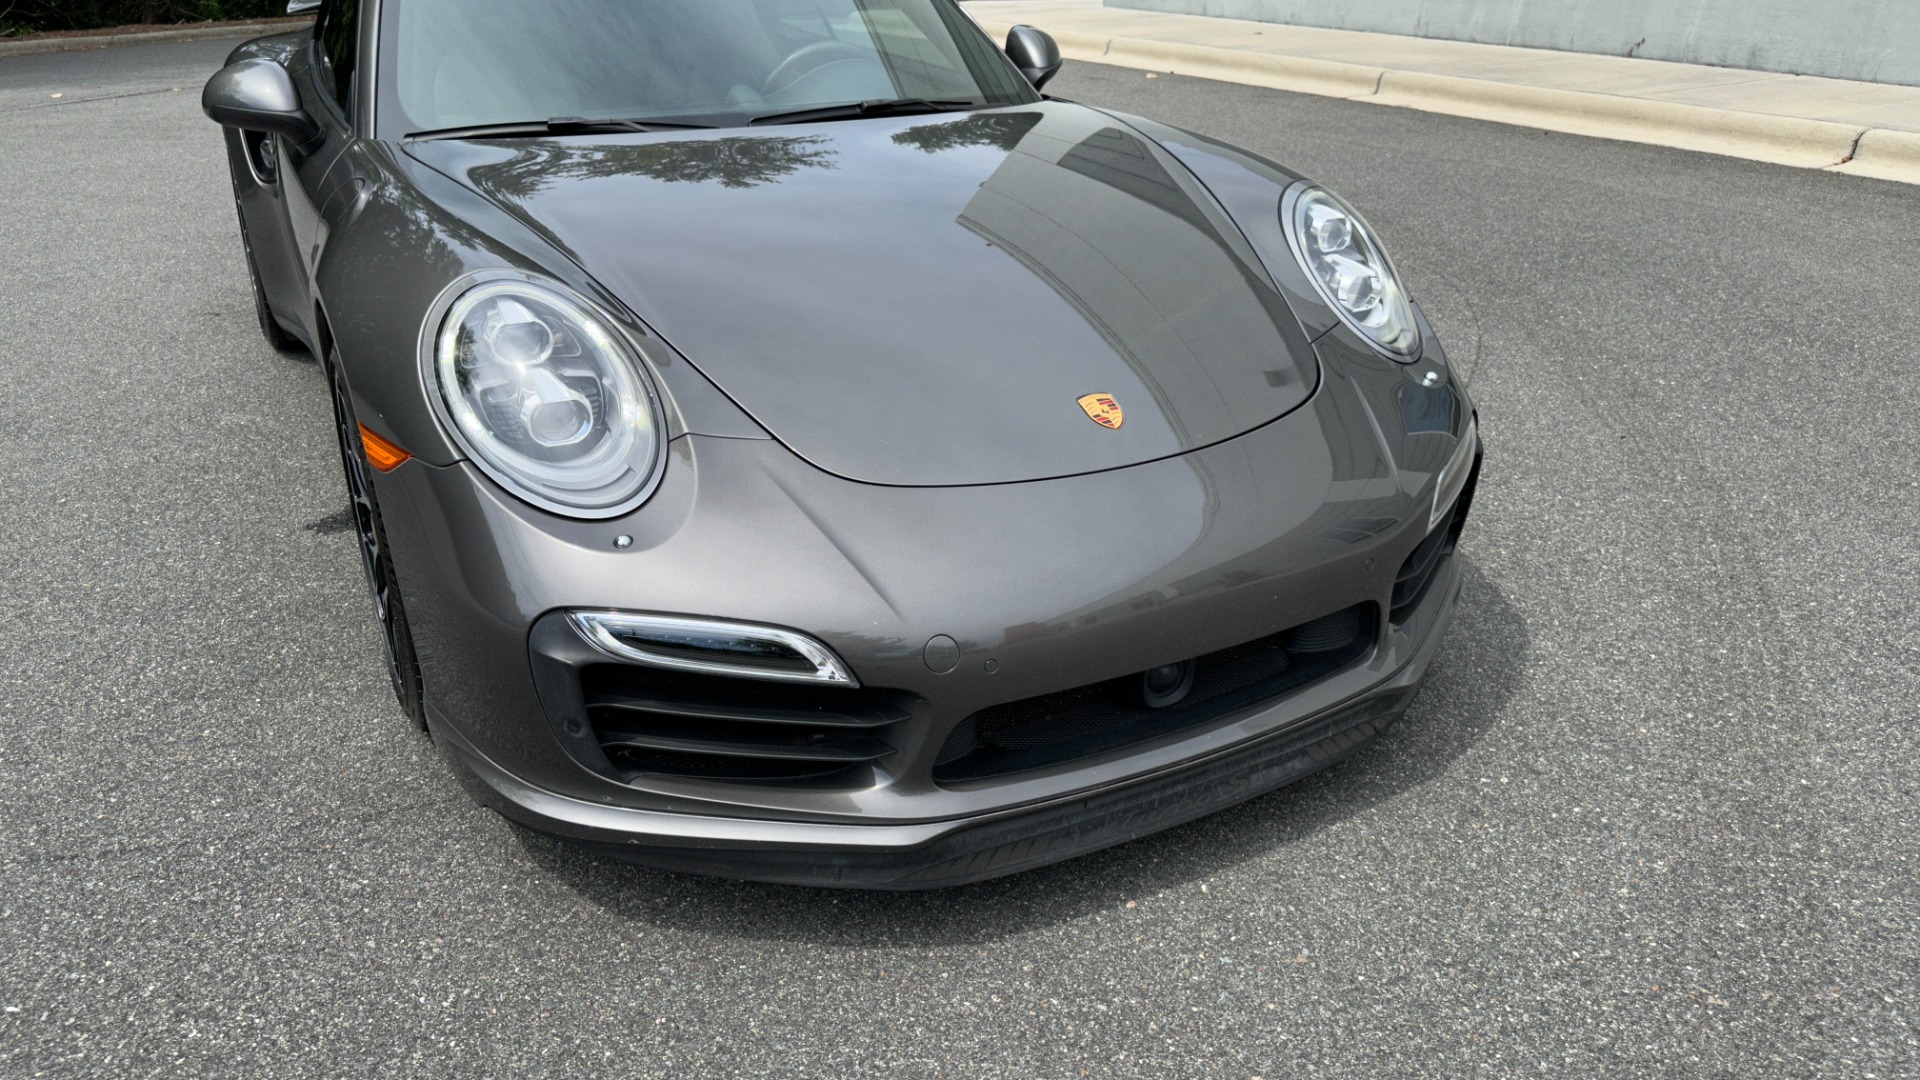 Used 2015 Porsche 911 TURBO S / BYDESIGN STAGE 4.2 POWER PACKAGE / $30K IN UPGRADES / APPLE CARPL for sale $118,999 at Formula Imports in Charlotte NC 28227 10